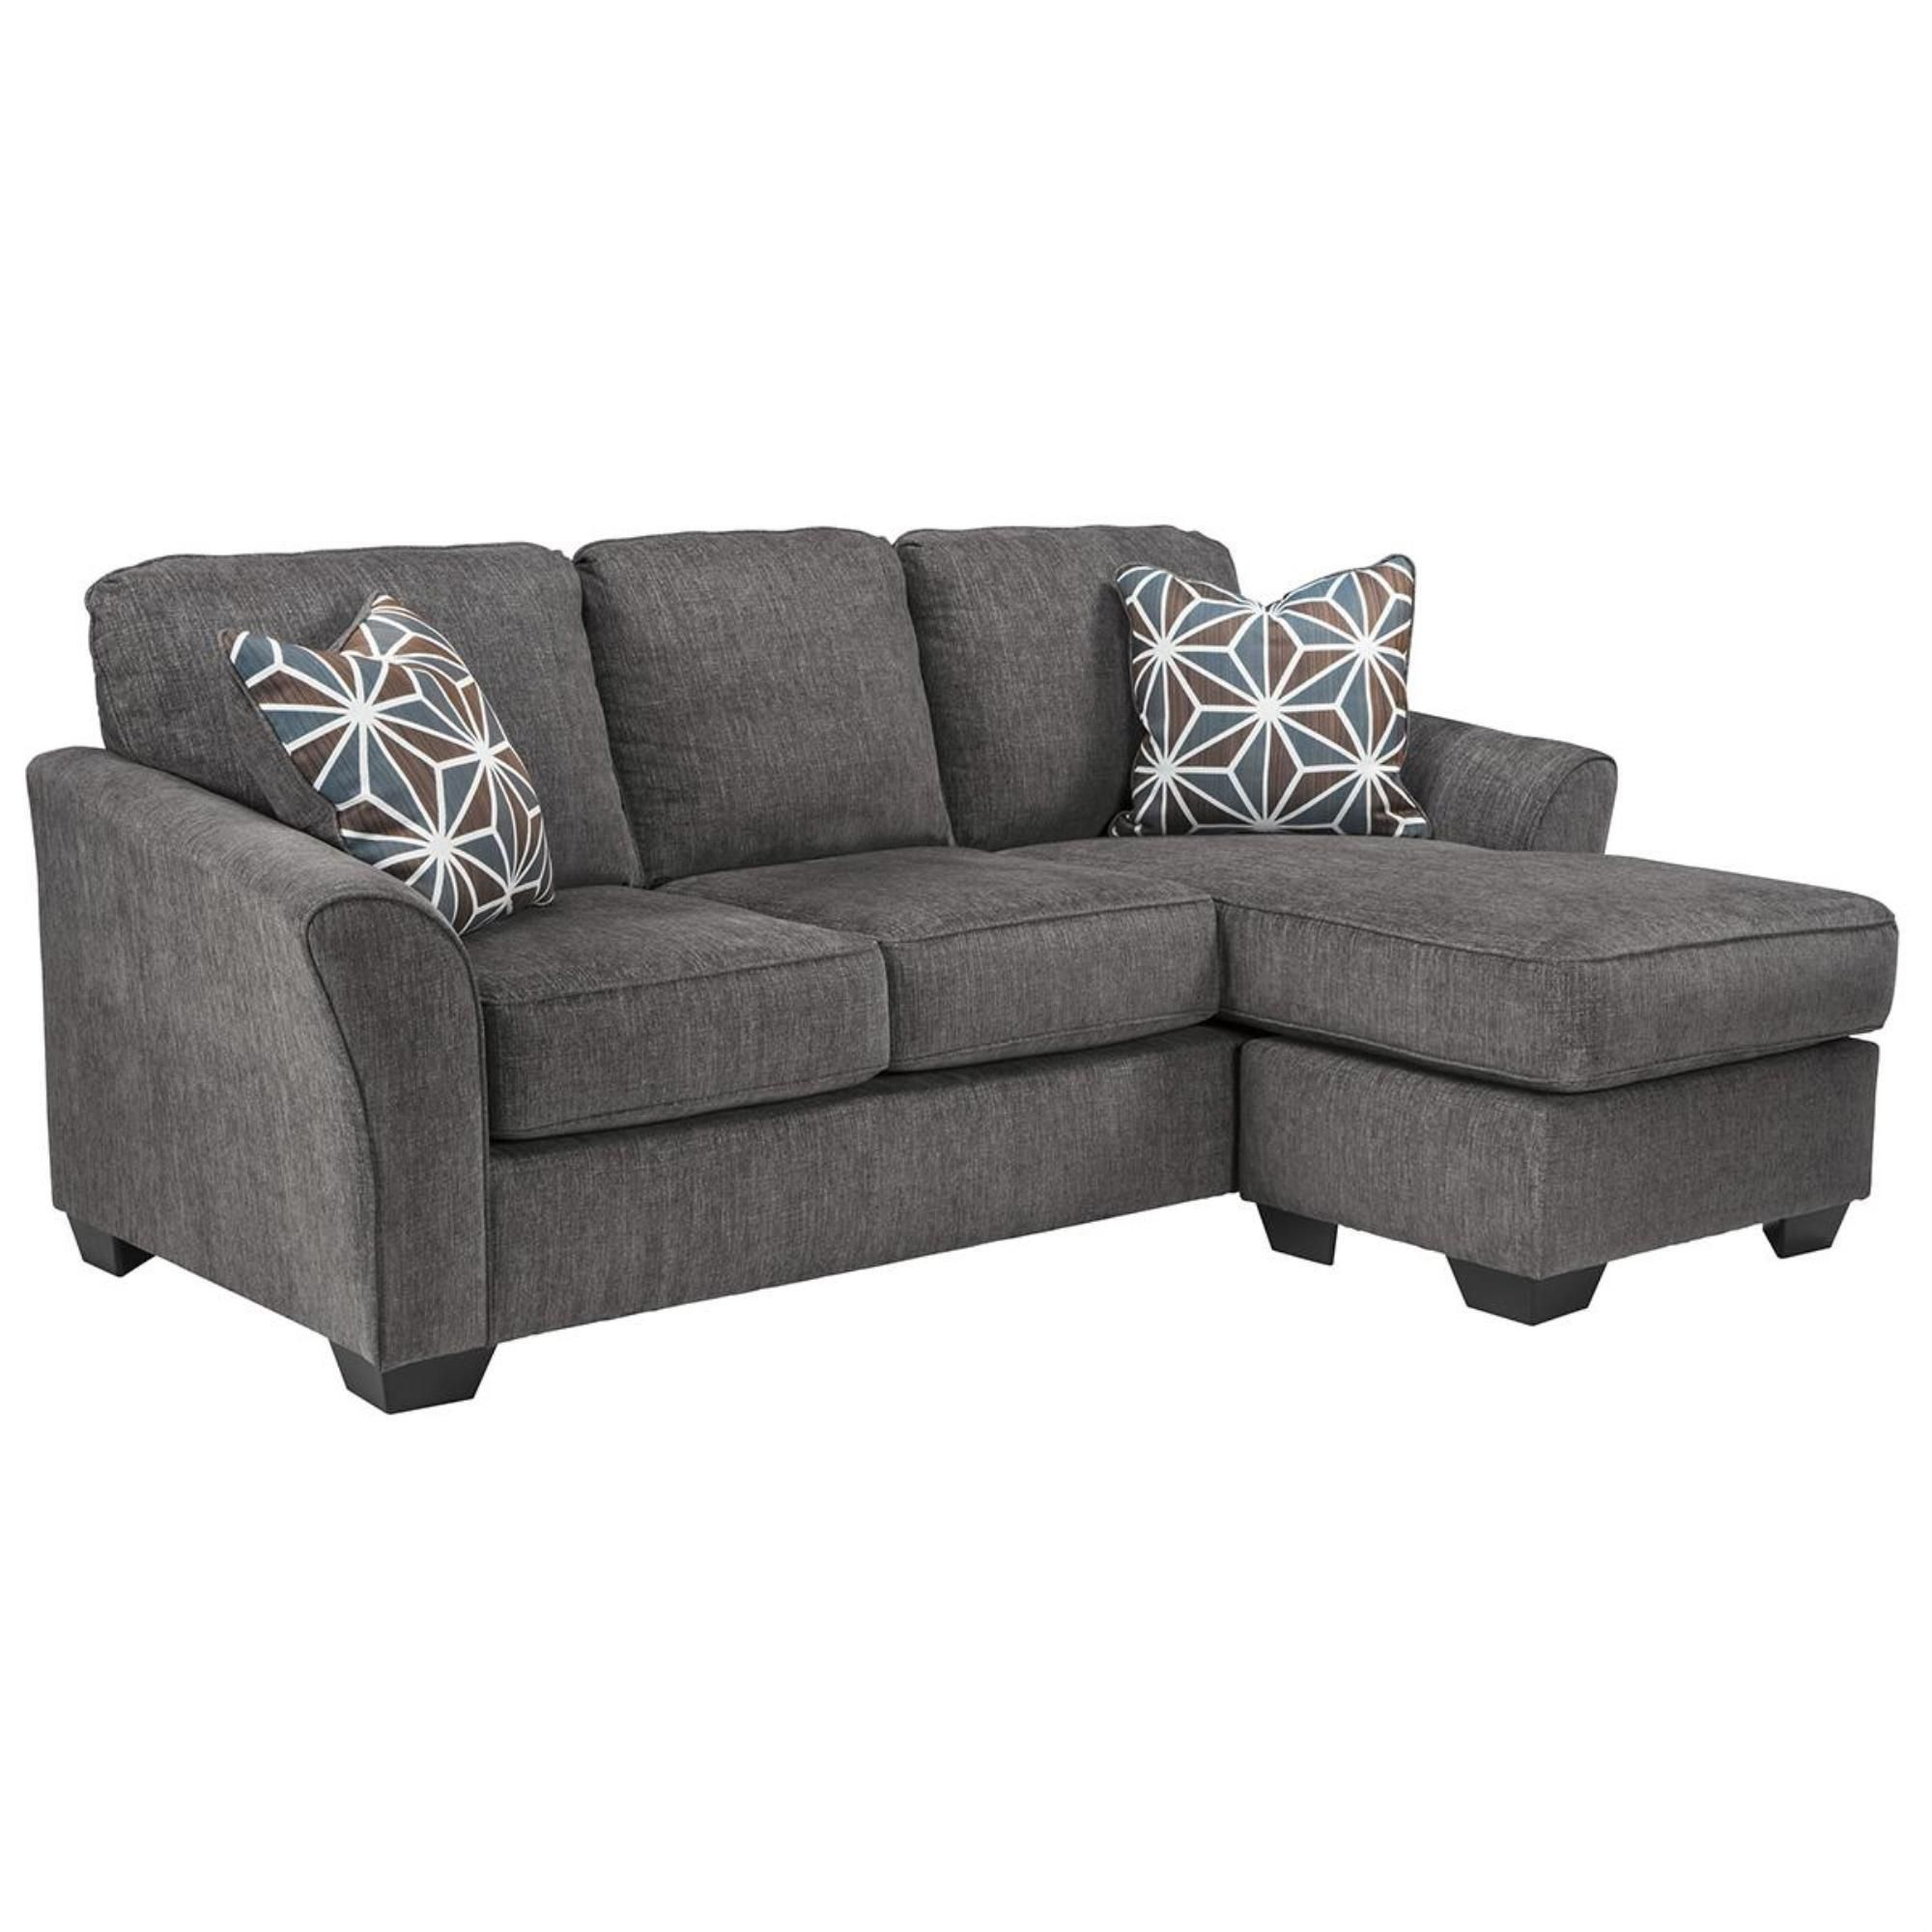 Signature Designashley Brise Queen Sleeper Sofa With Chaise In Gray |  Nfm Throughout Convertible Sofa With Matching Chaise (View 17 of 20)